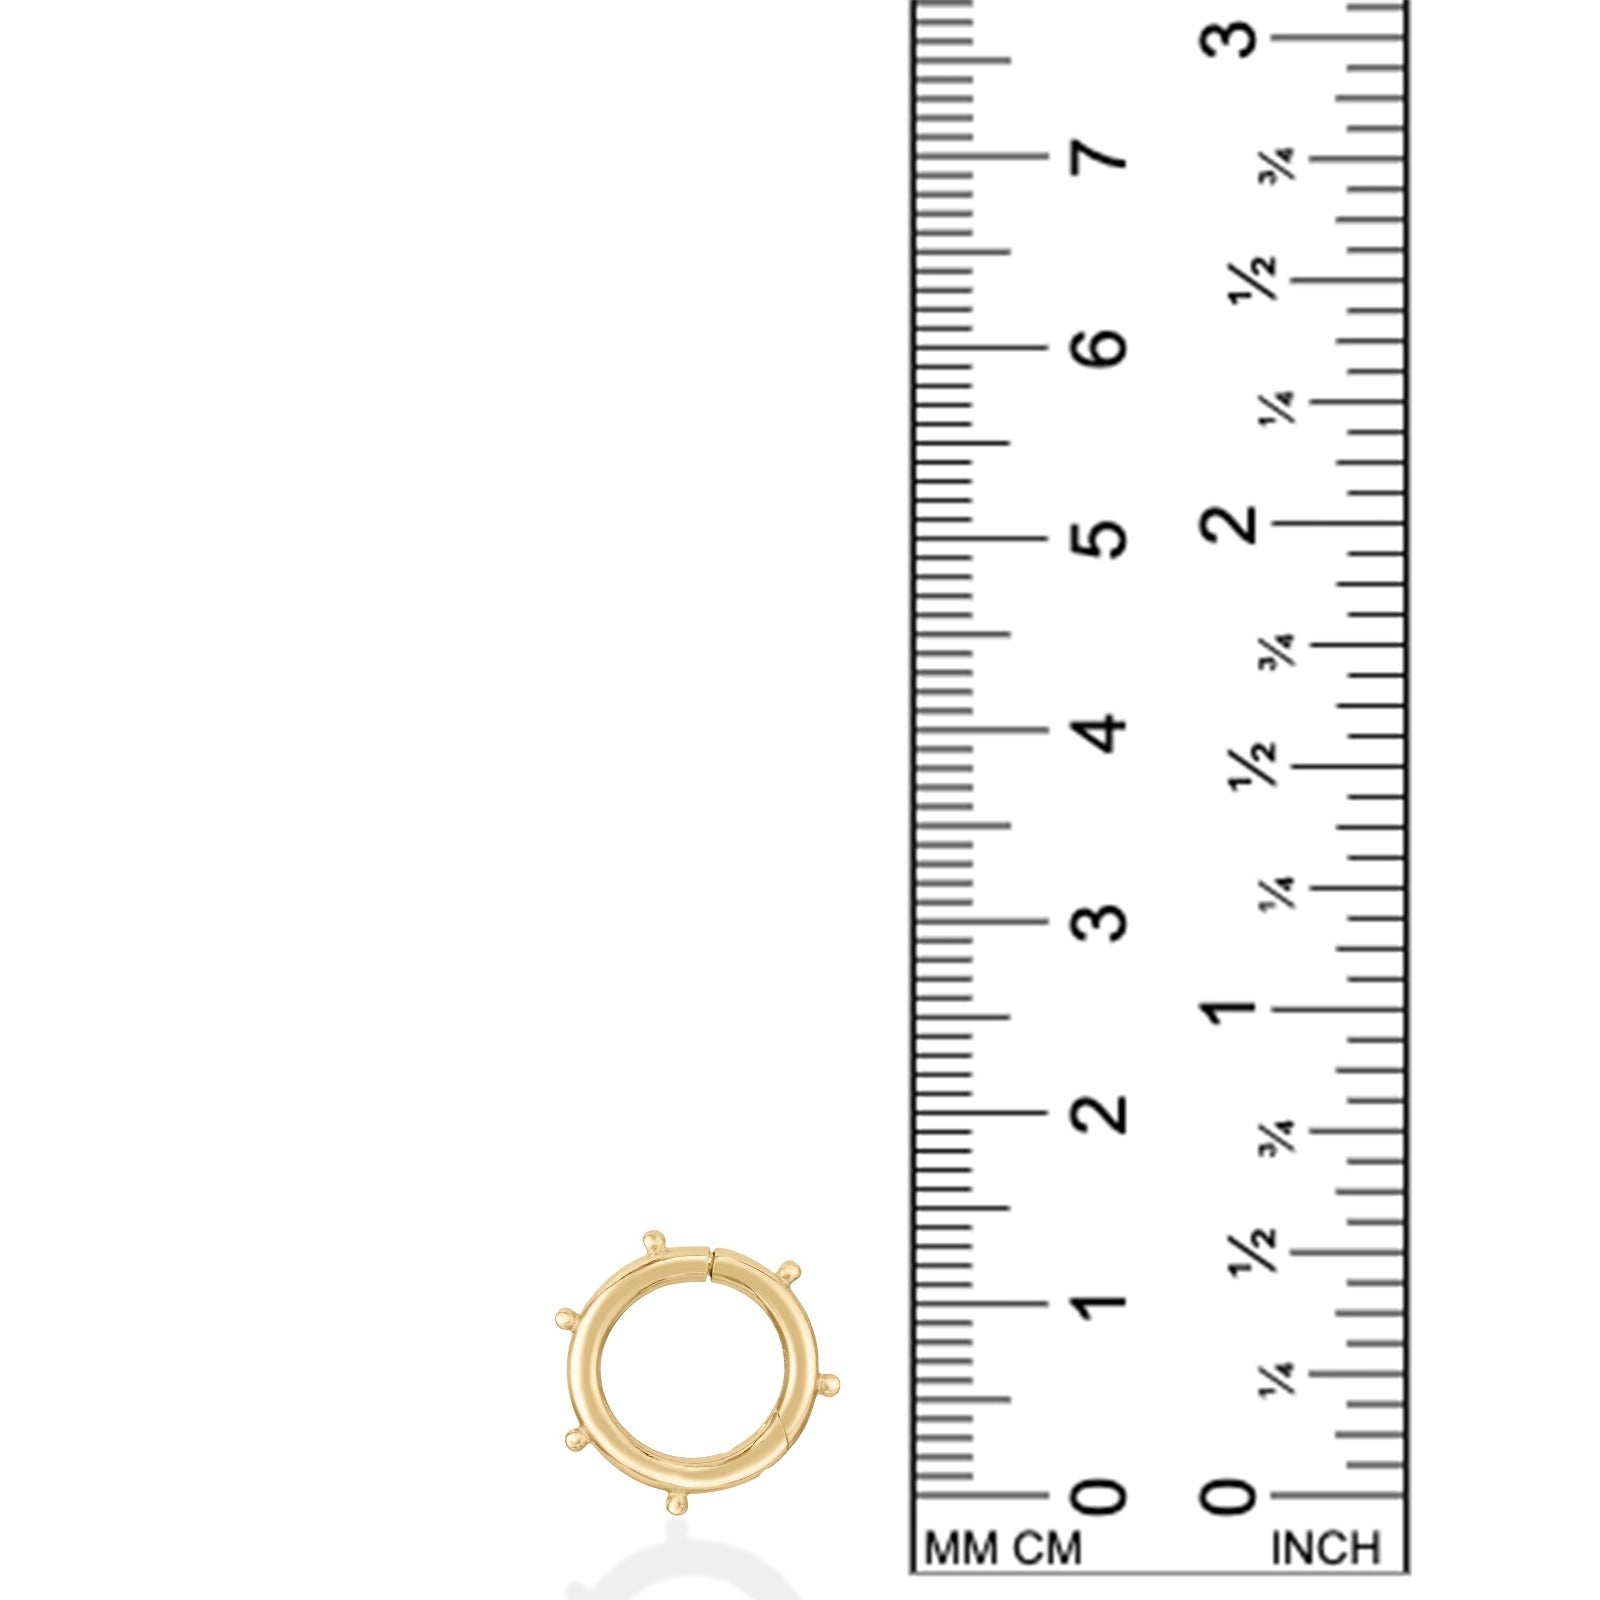 14k recycled yellow gold Beaded Round Charm Lock next to a ruler showing the size 